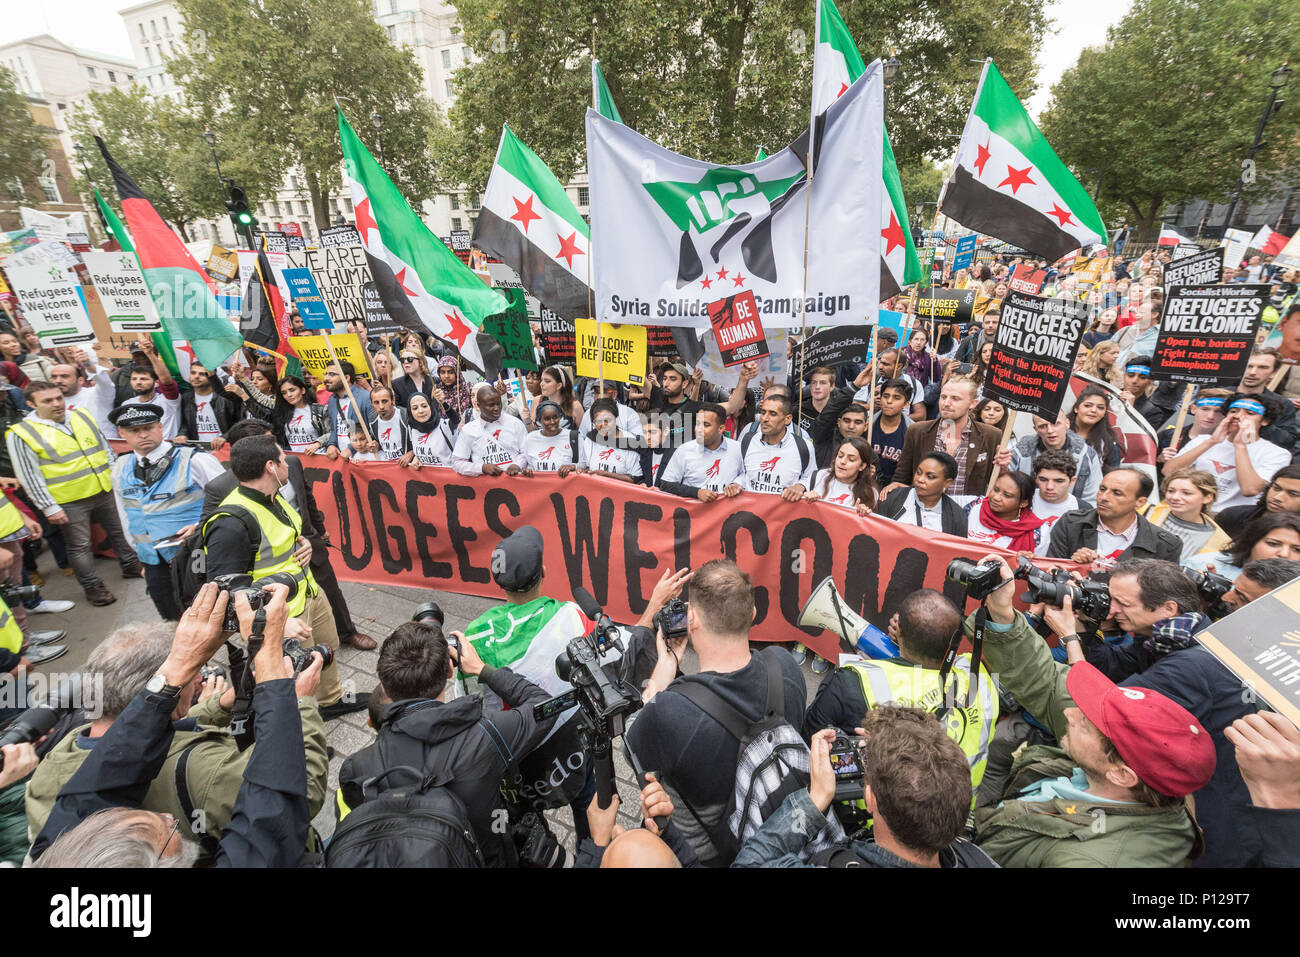 London, September 17th 2016. Several thousand protesters take to the streets of central London to support refugees coming to the UK. Beginning at Park Stock Photo